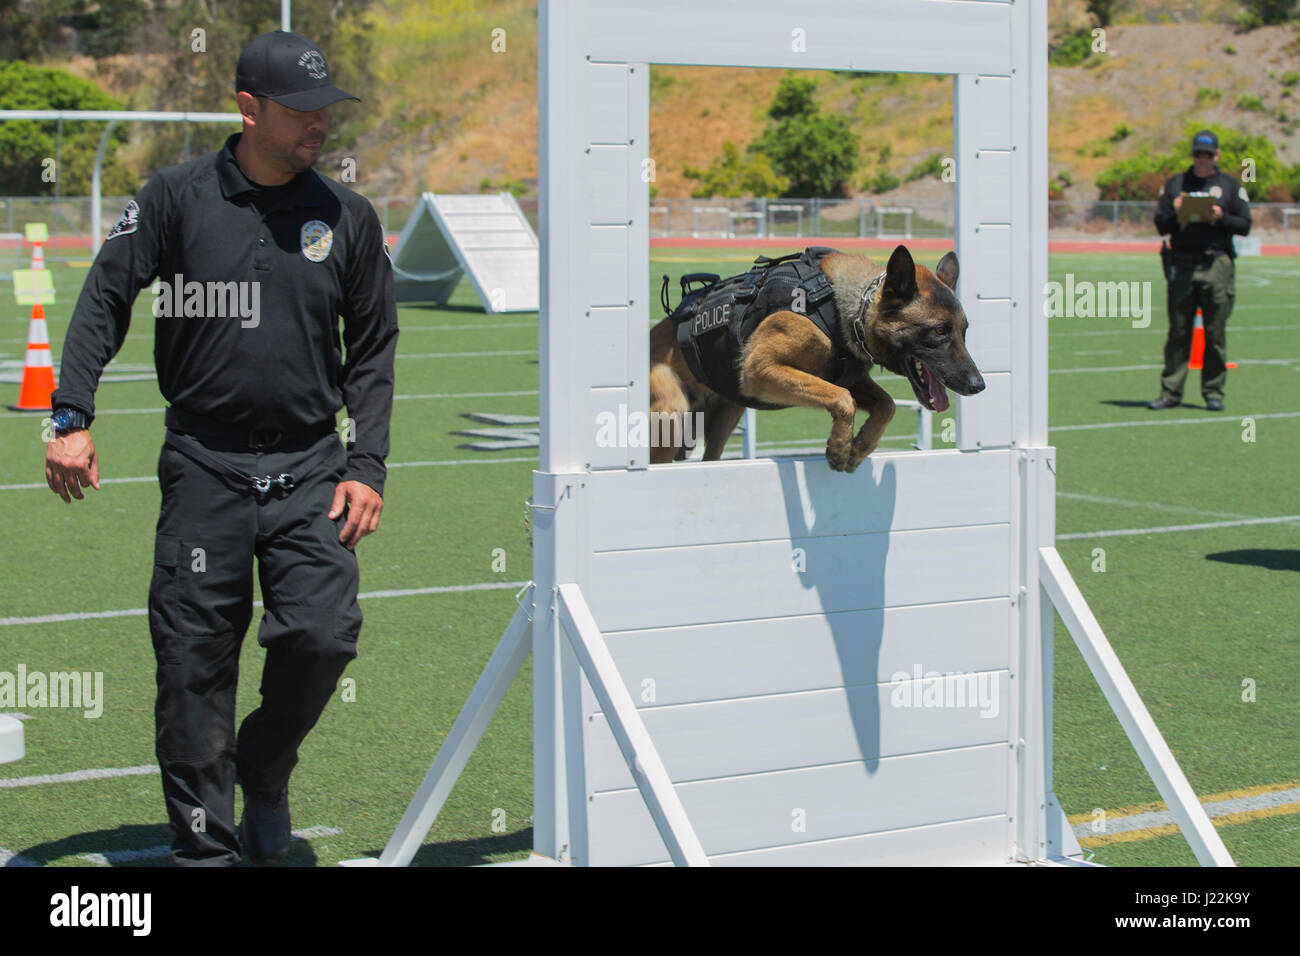 Police Officer Fryan Rodriguez, West Covina Police Department, runs his canine, Reiko, through an obstacle for the 1st Annual City of Oceanside Public Safety Fair at El Camino High School football field in Oceanside, Calif., April 22, 2017. (U.S. Marine Corps photo by Lance Cpl. Brooke Woods) Stock Photo